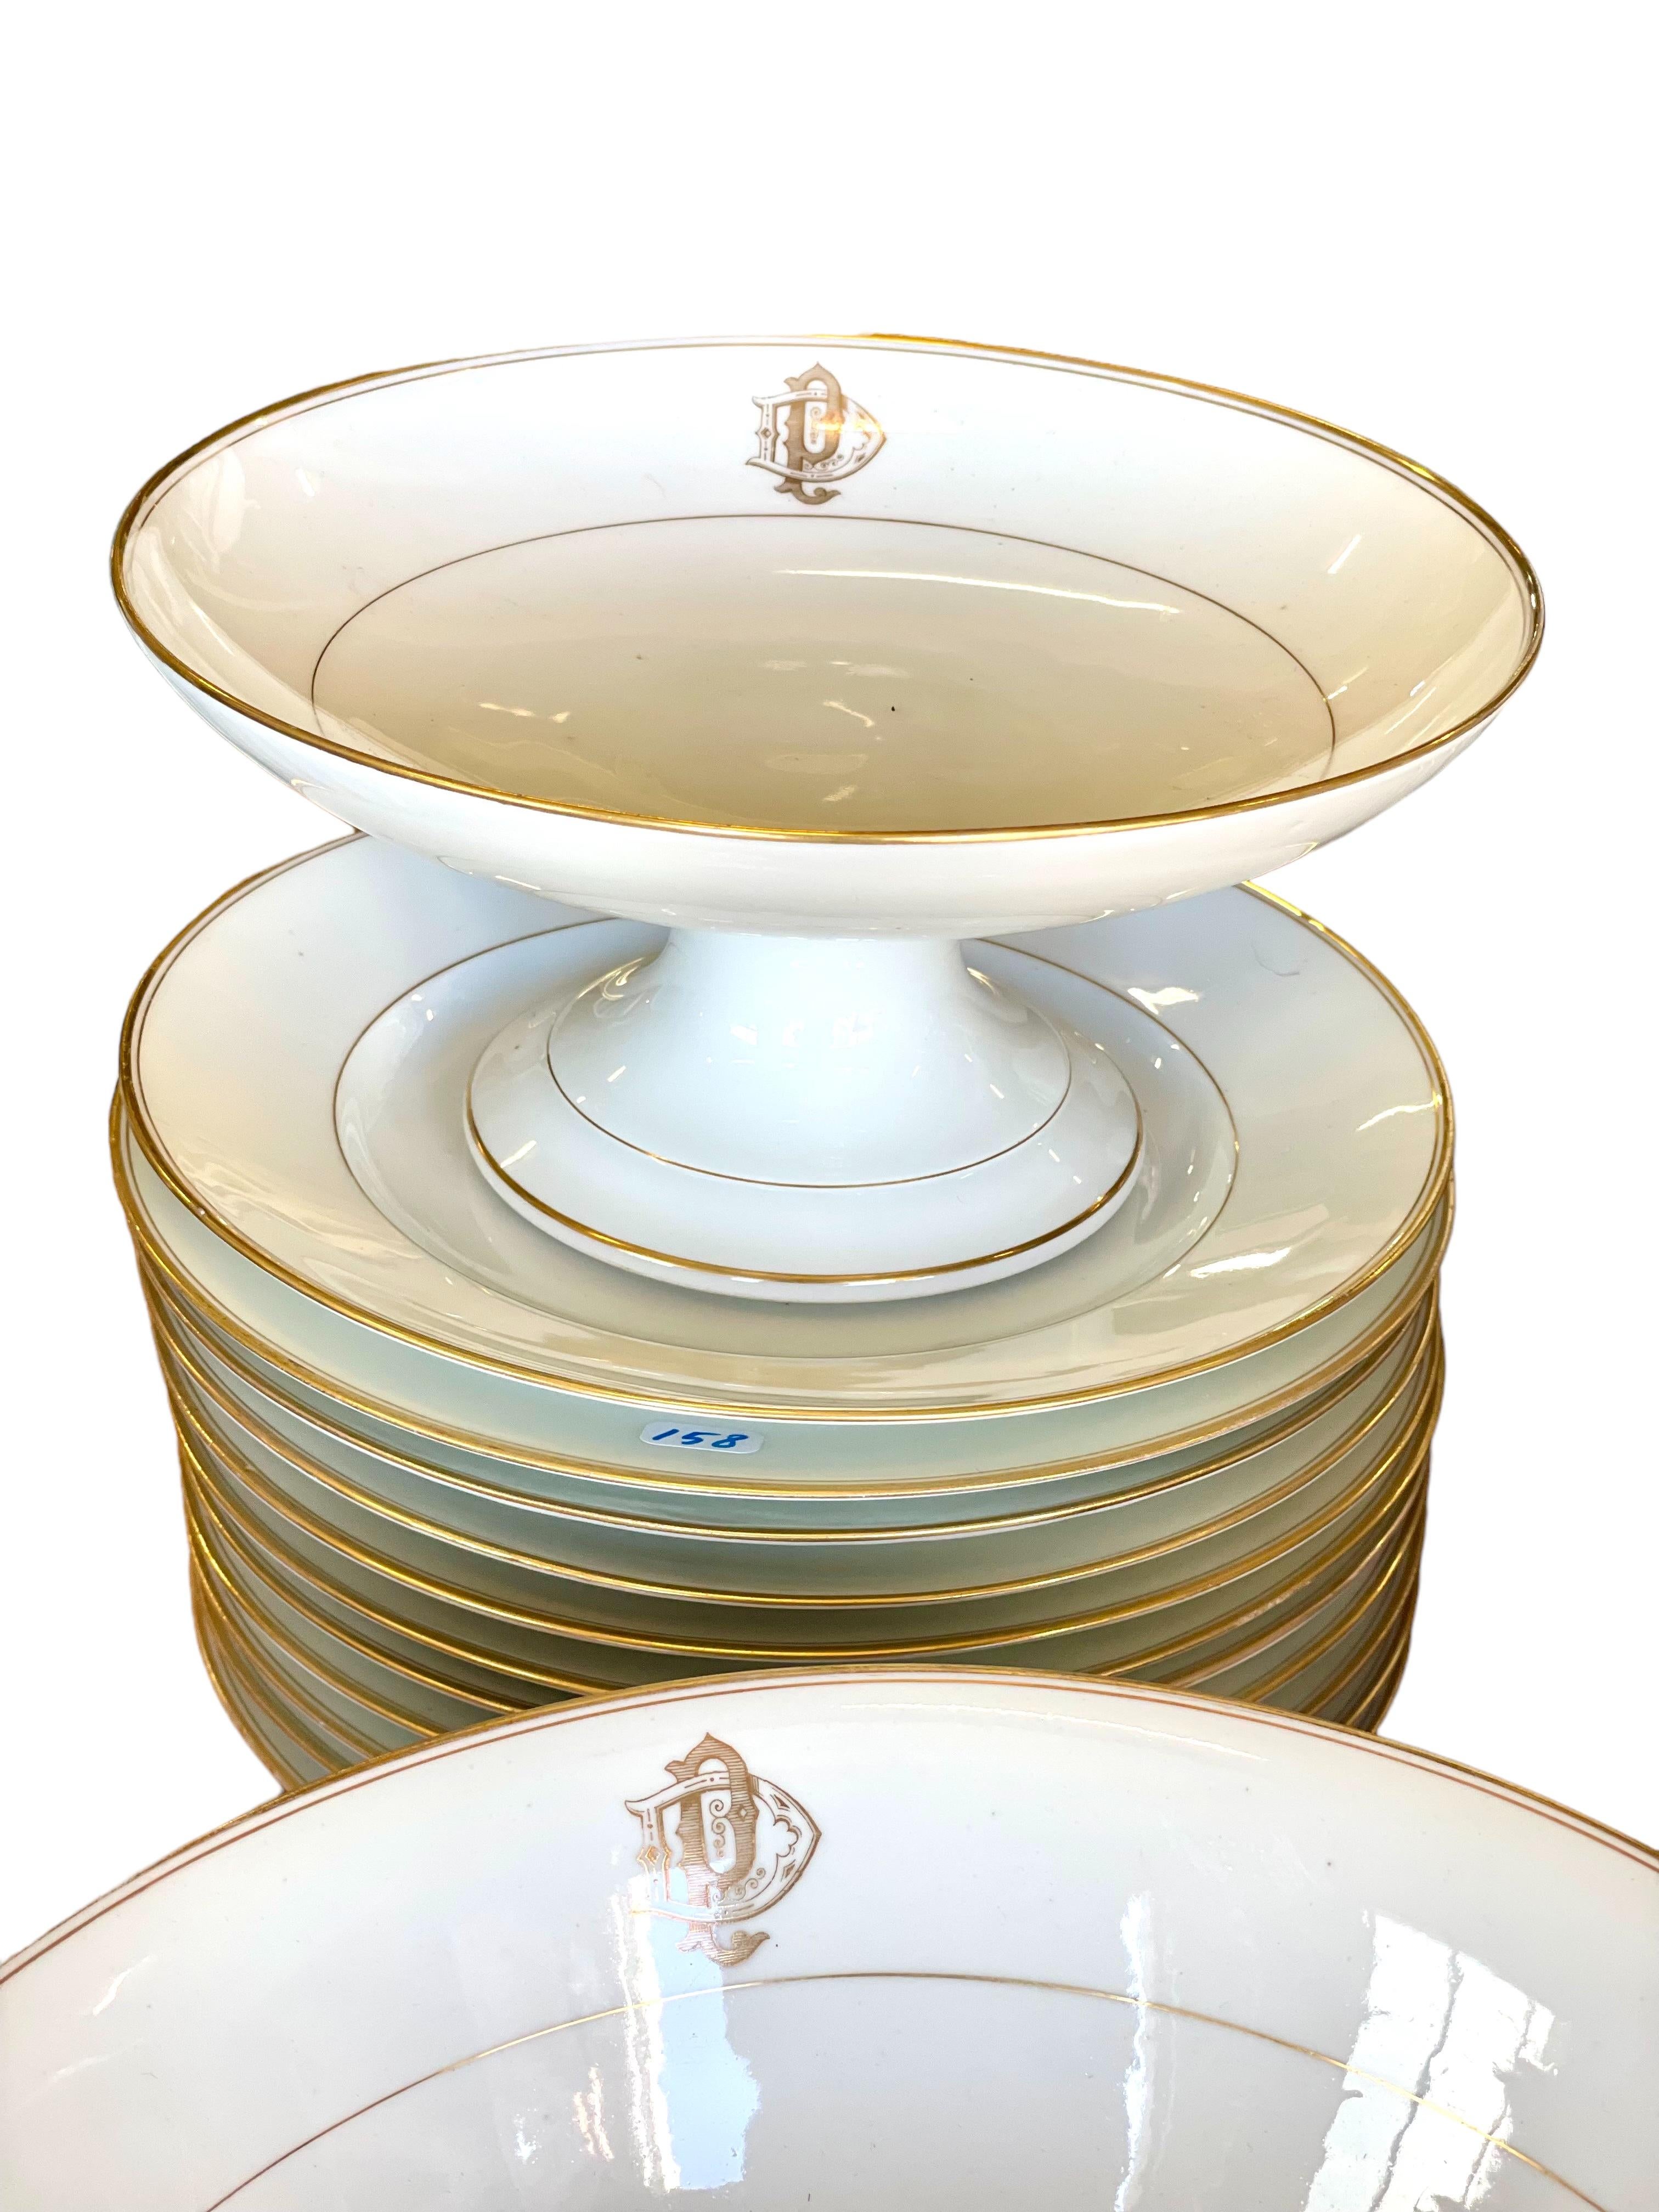 French Limoges Porcelain Set of 50 Piece Dinner Service with Gilt Edges and Monogramme For Sale